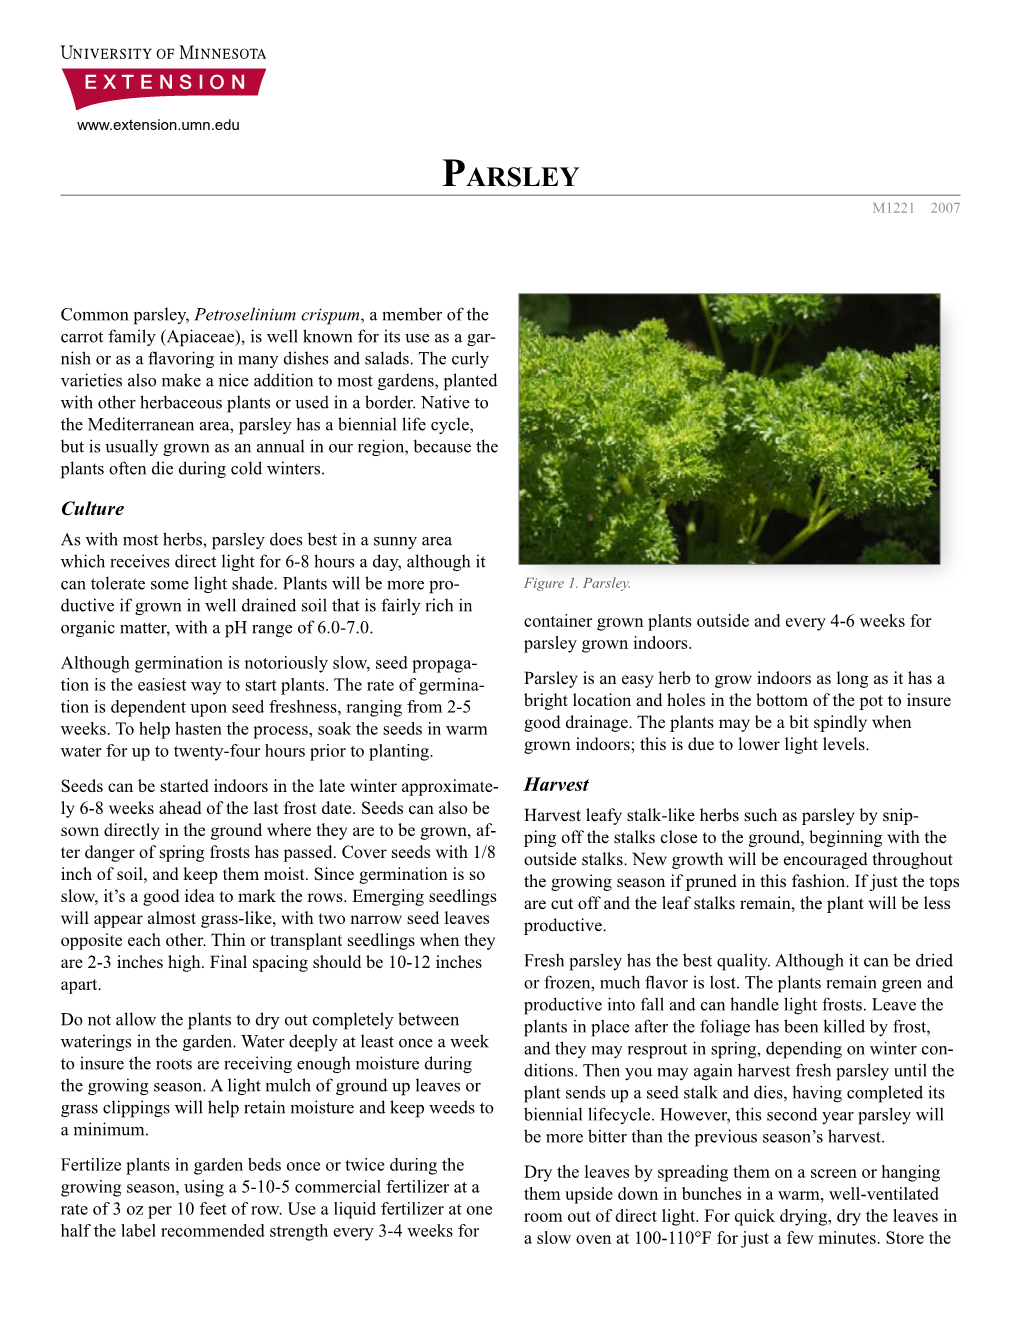 Parsley, Petroselinium Crispum, a Member of the Carrot Family (Apiaceae), Is Well Known for Its Use As a Gar- Nish Or As a Flavoring in Many Dishes and Salads